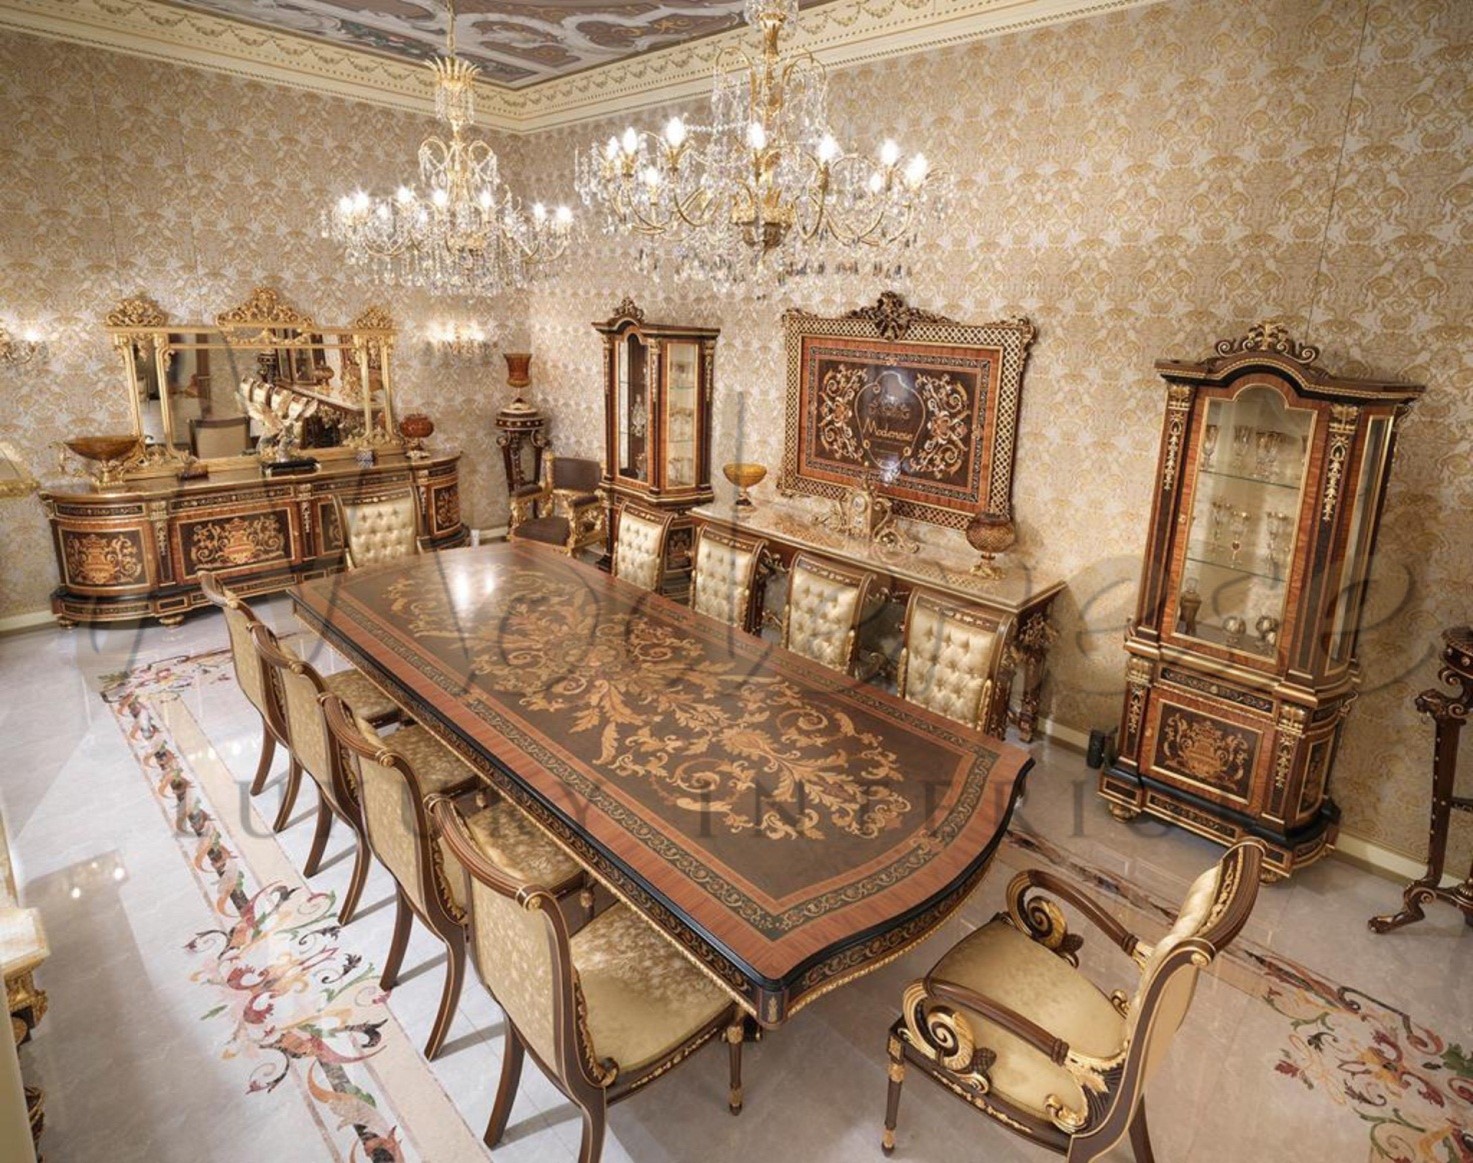 LUXURIOUS DINING ROOM DESIGN FROM MODENESE INTERIORS